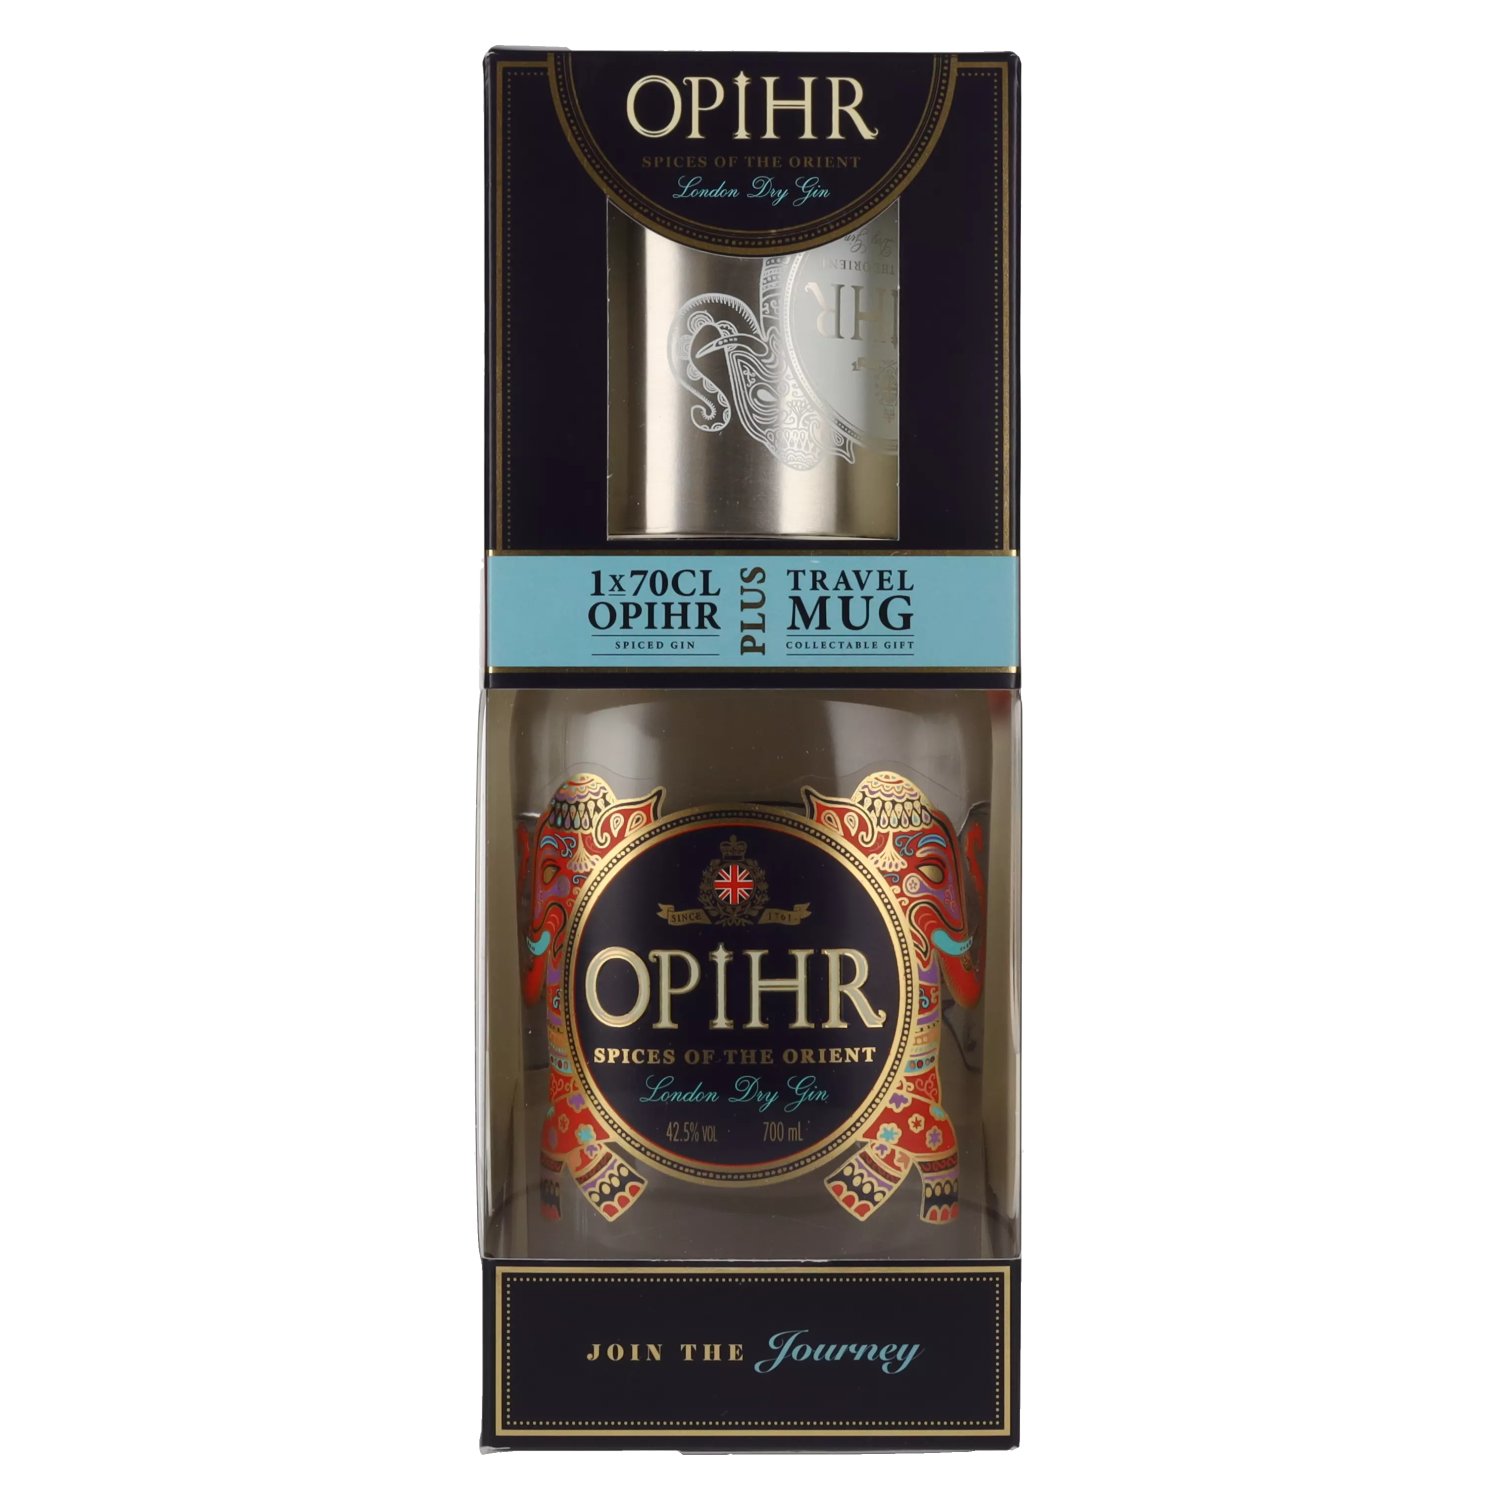 Opihr ORIENTAL SPICED London Dry Gin 42,5% Vol. 0,7l in Giftbox with Travel  Mug